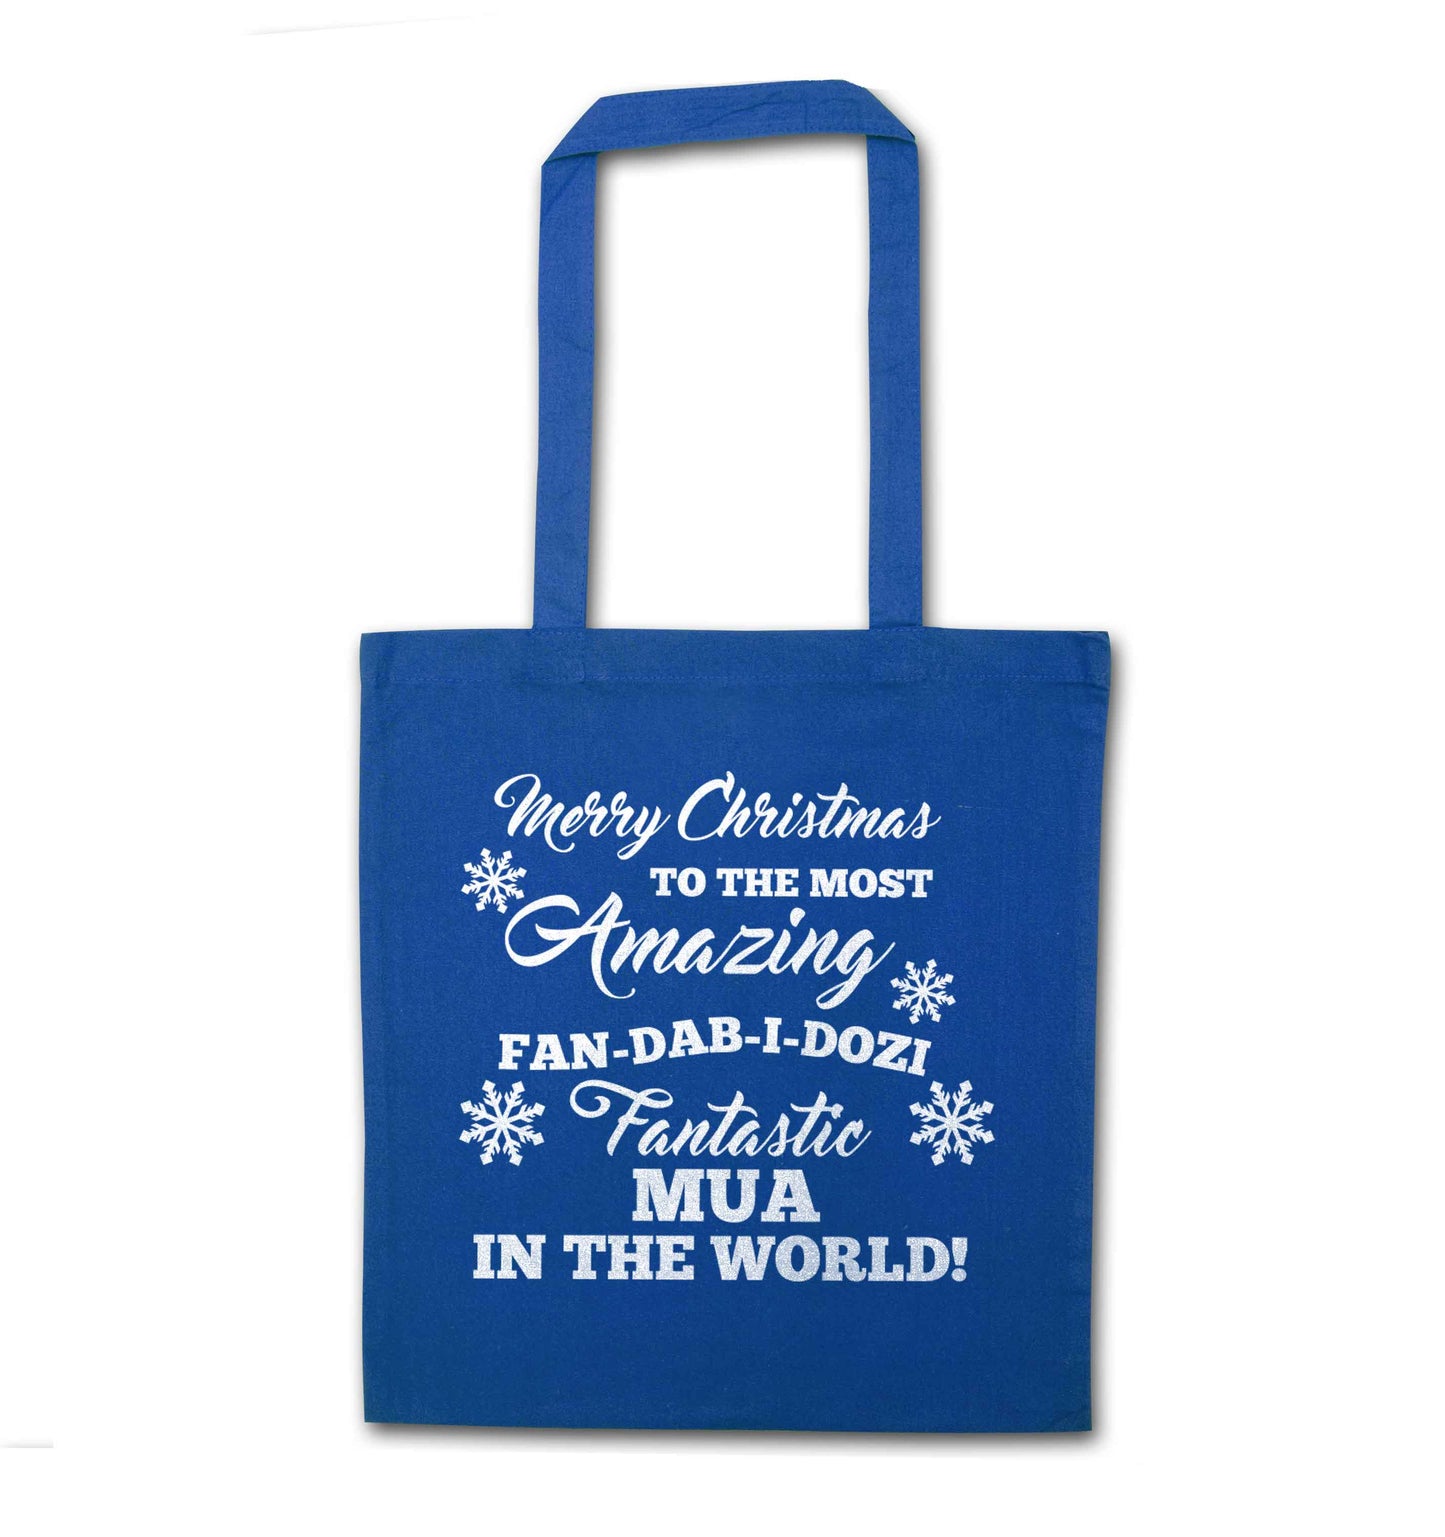 Merry Christmas to the most amazing fan-dab-i-dozi fantasic MUA in the world blue tote bag